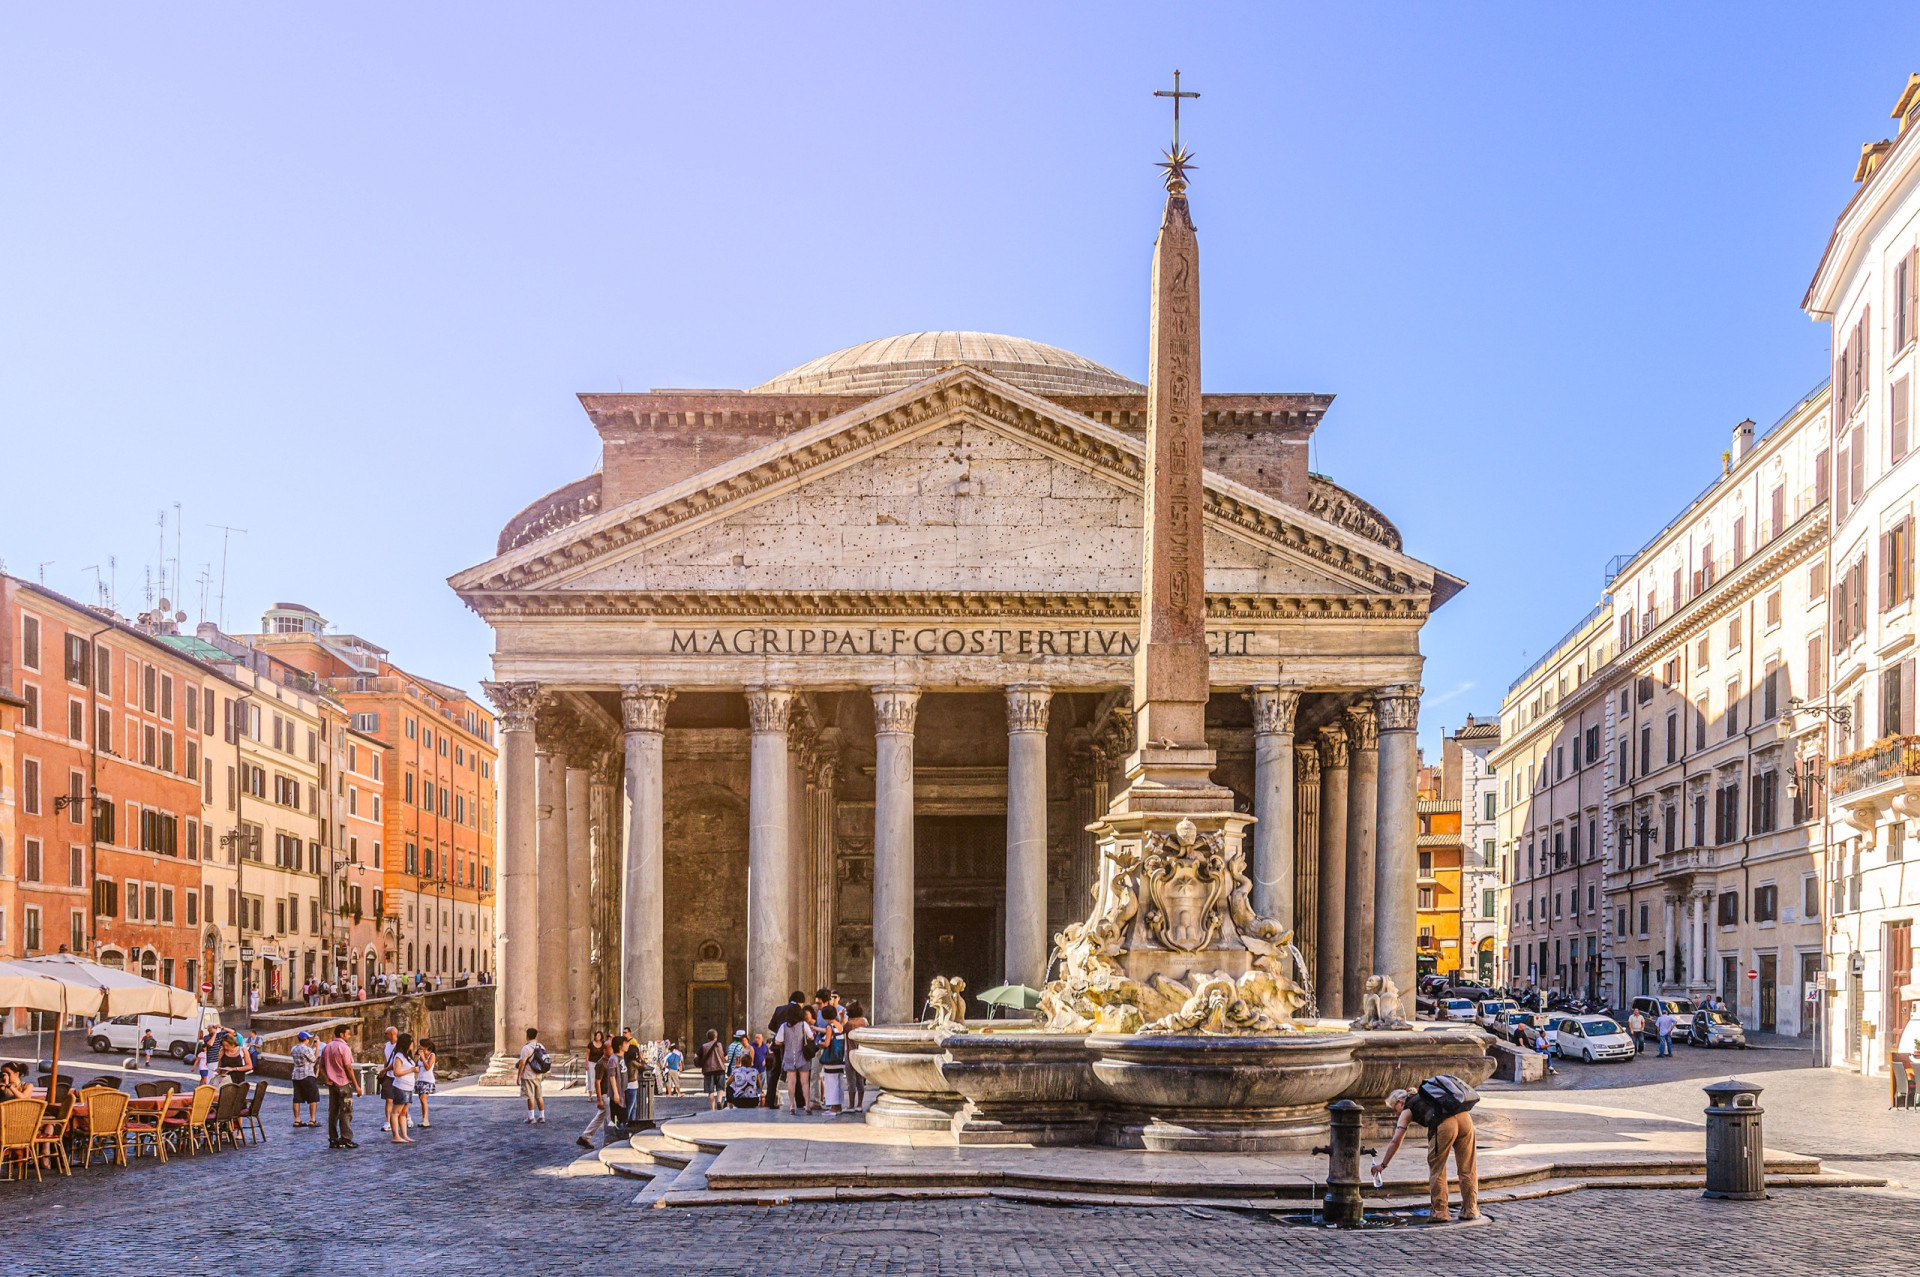 <p>The Pantheon is another popular destination in Rome where you'll experience a high likelihood of being pickpocketed.</p><p>You may also like:<a href="https://www.starsinsider.com/n/266946?utm_source=msn.com&utm_medium=display&utm_campaign=referral_description&utm_content=717448en-us"> Greek mythology: the great Greek Gods and heroes </a></p>